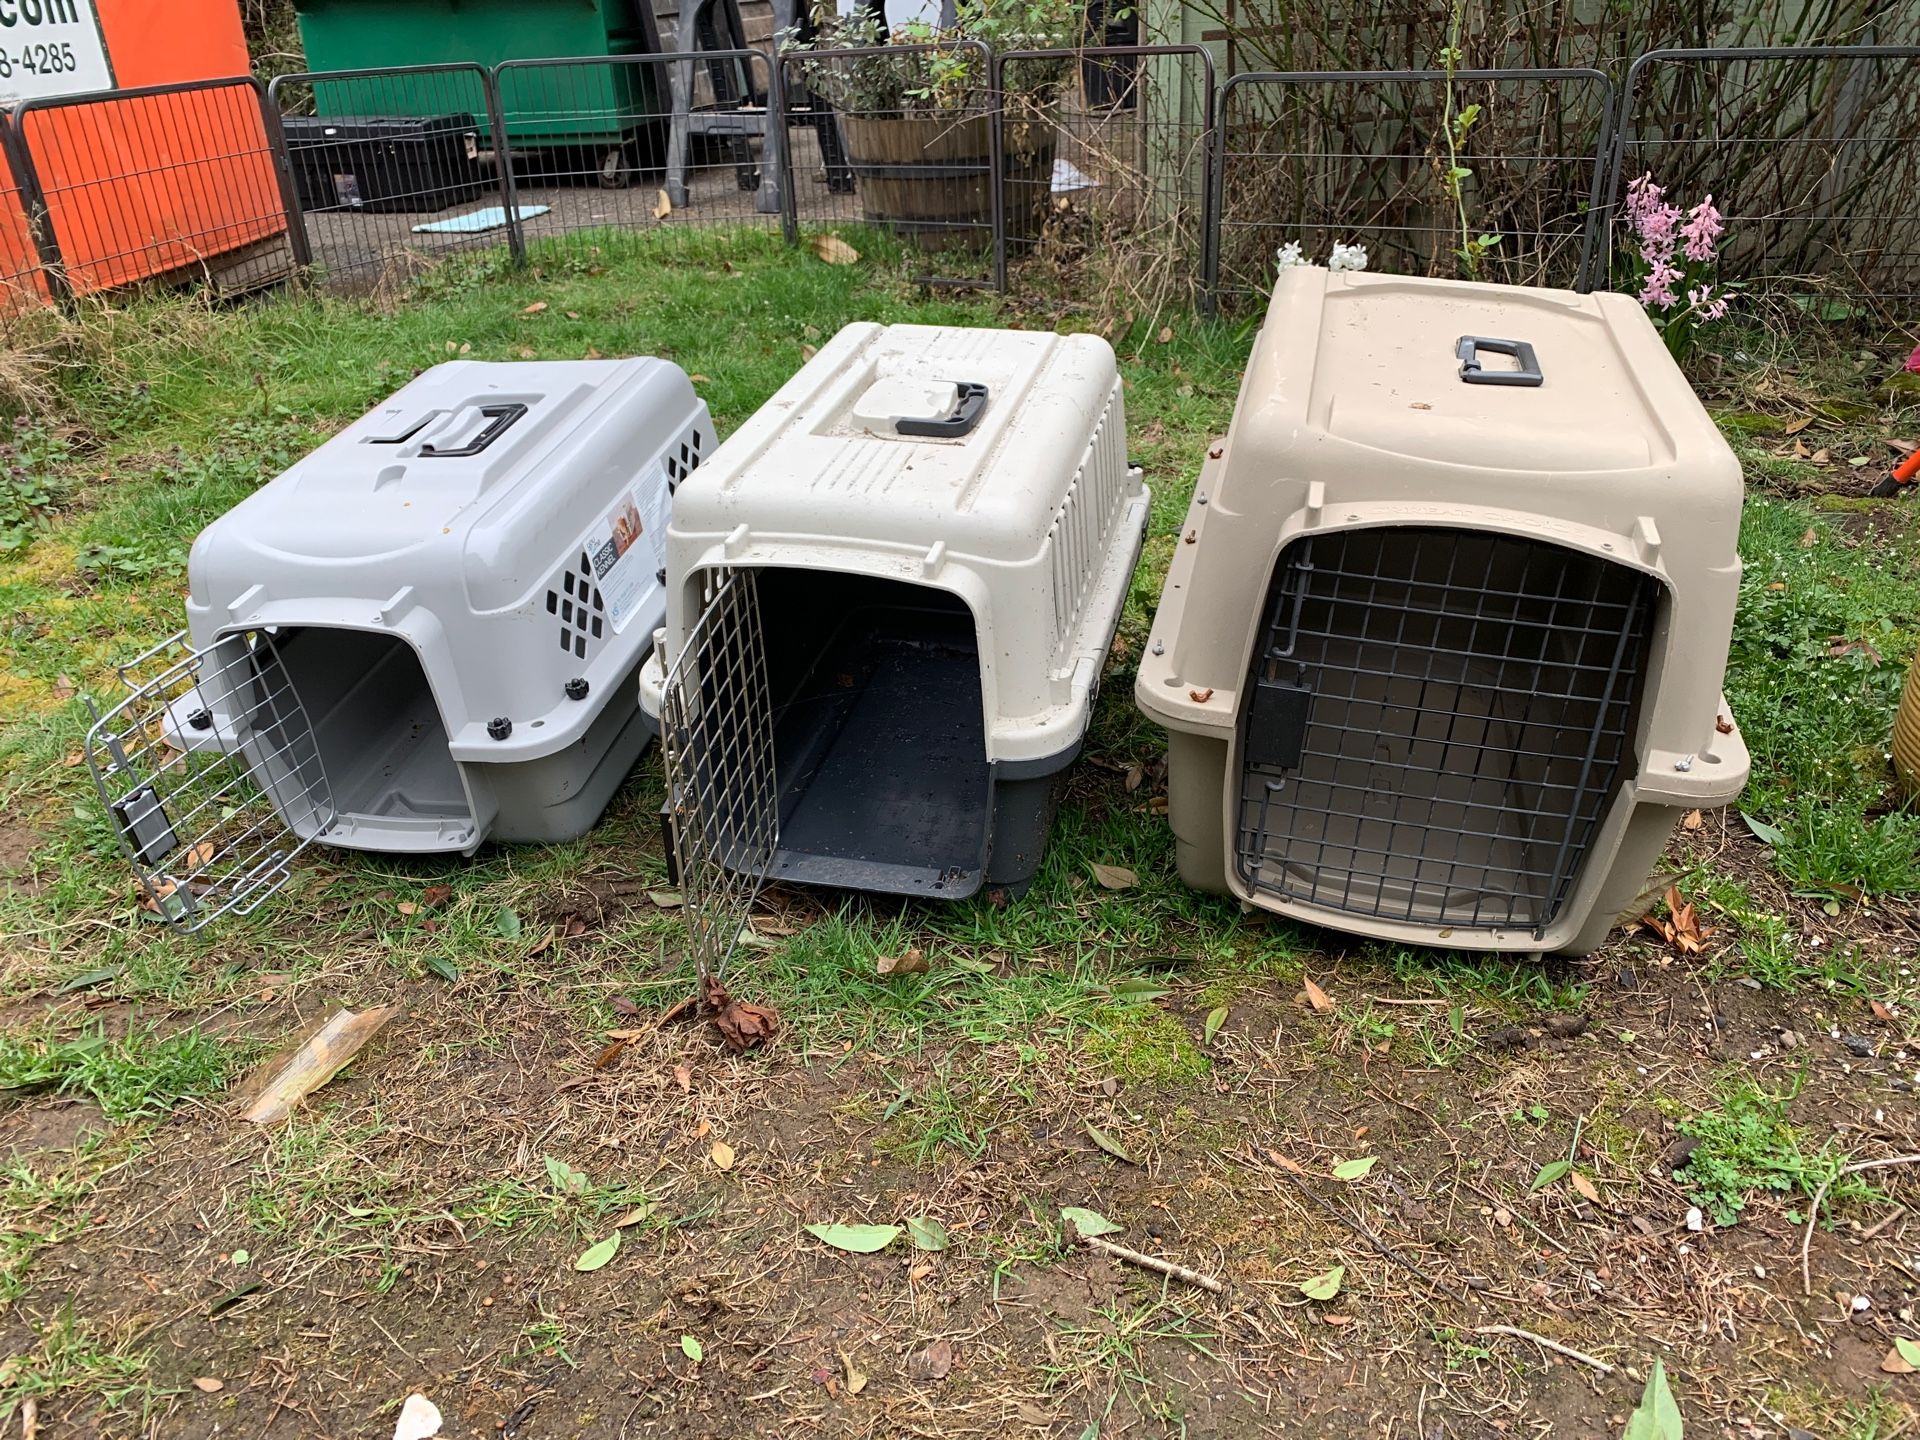 Two dog kennels $20 each